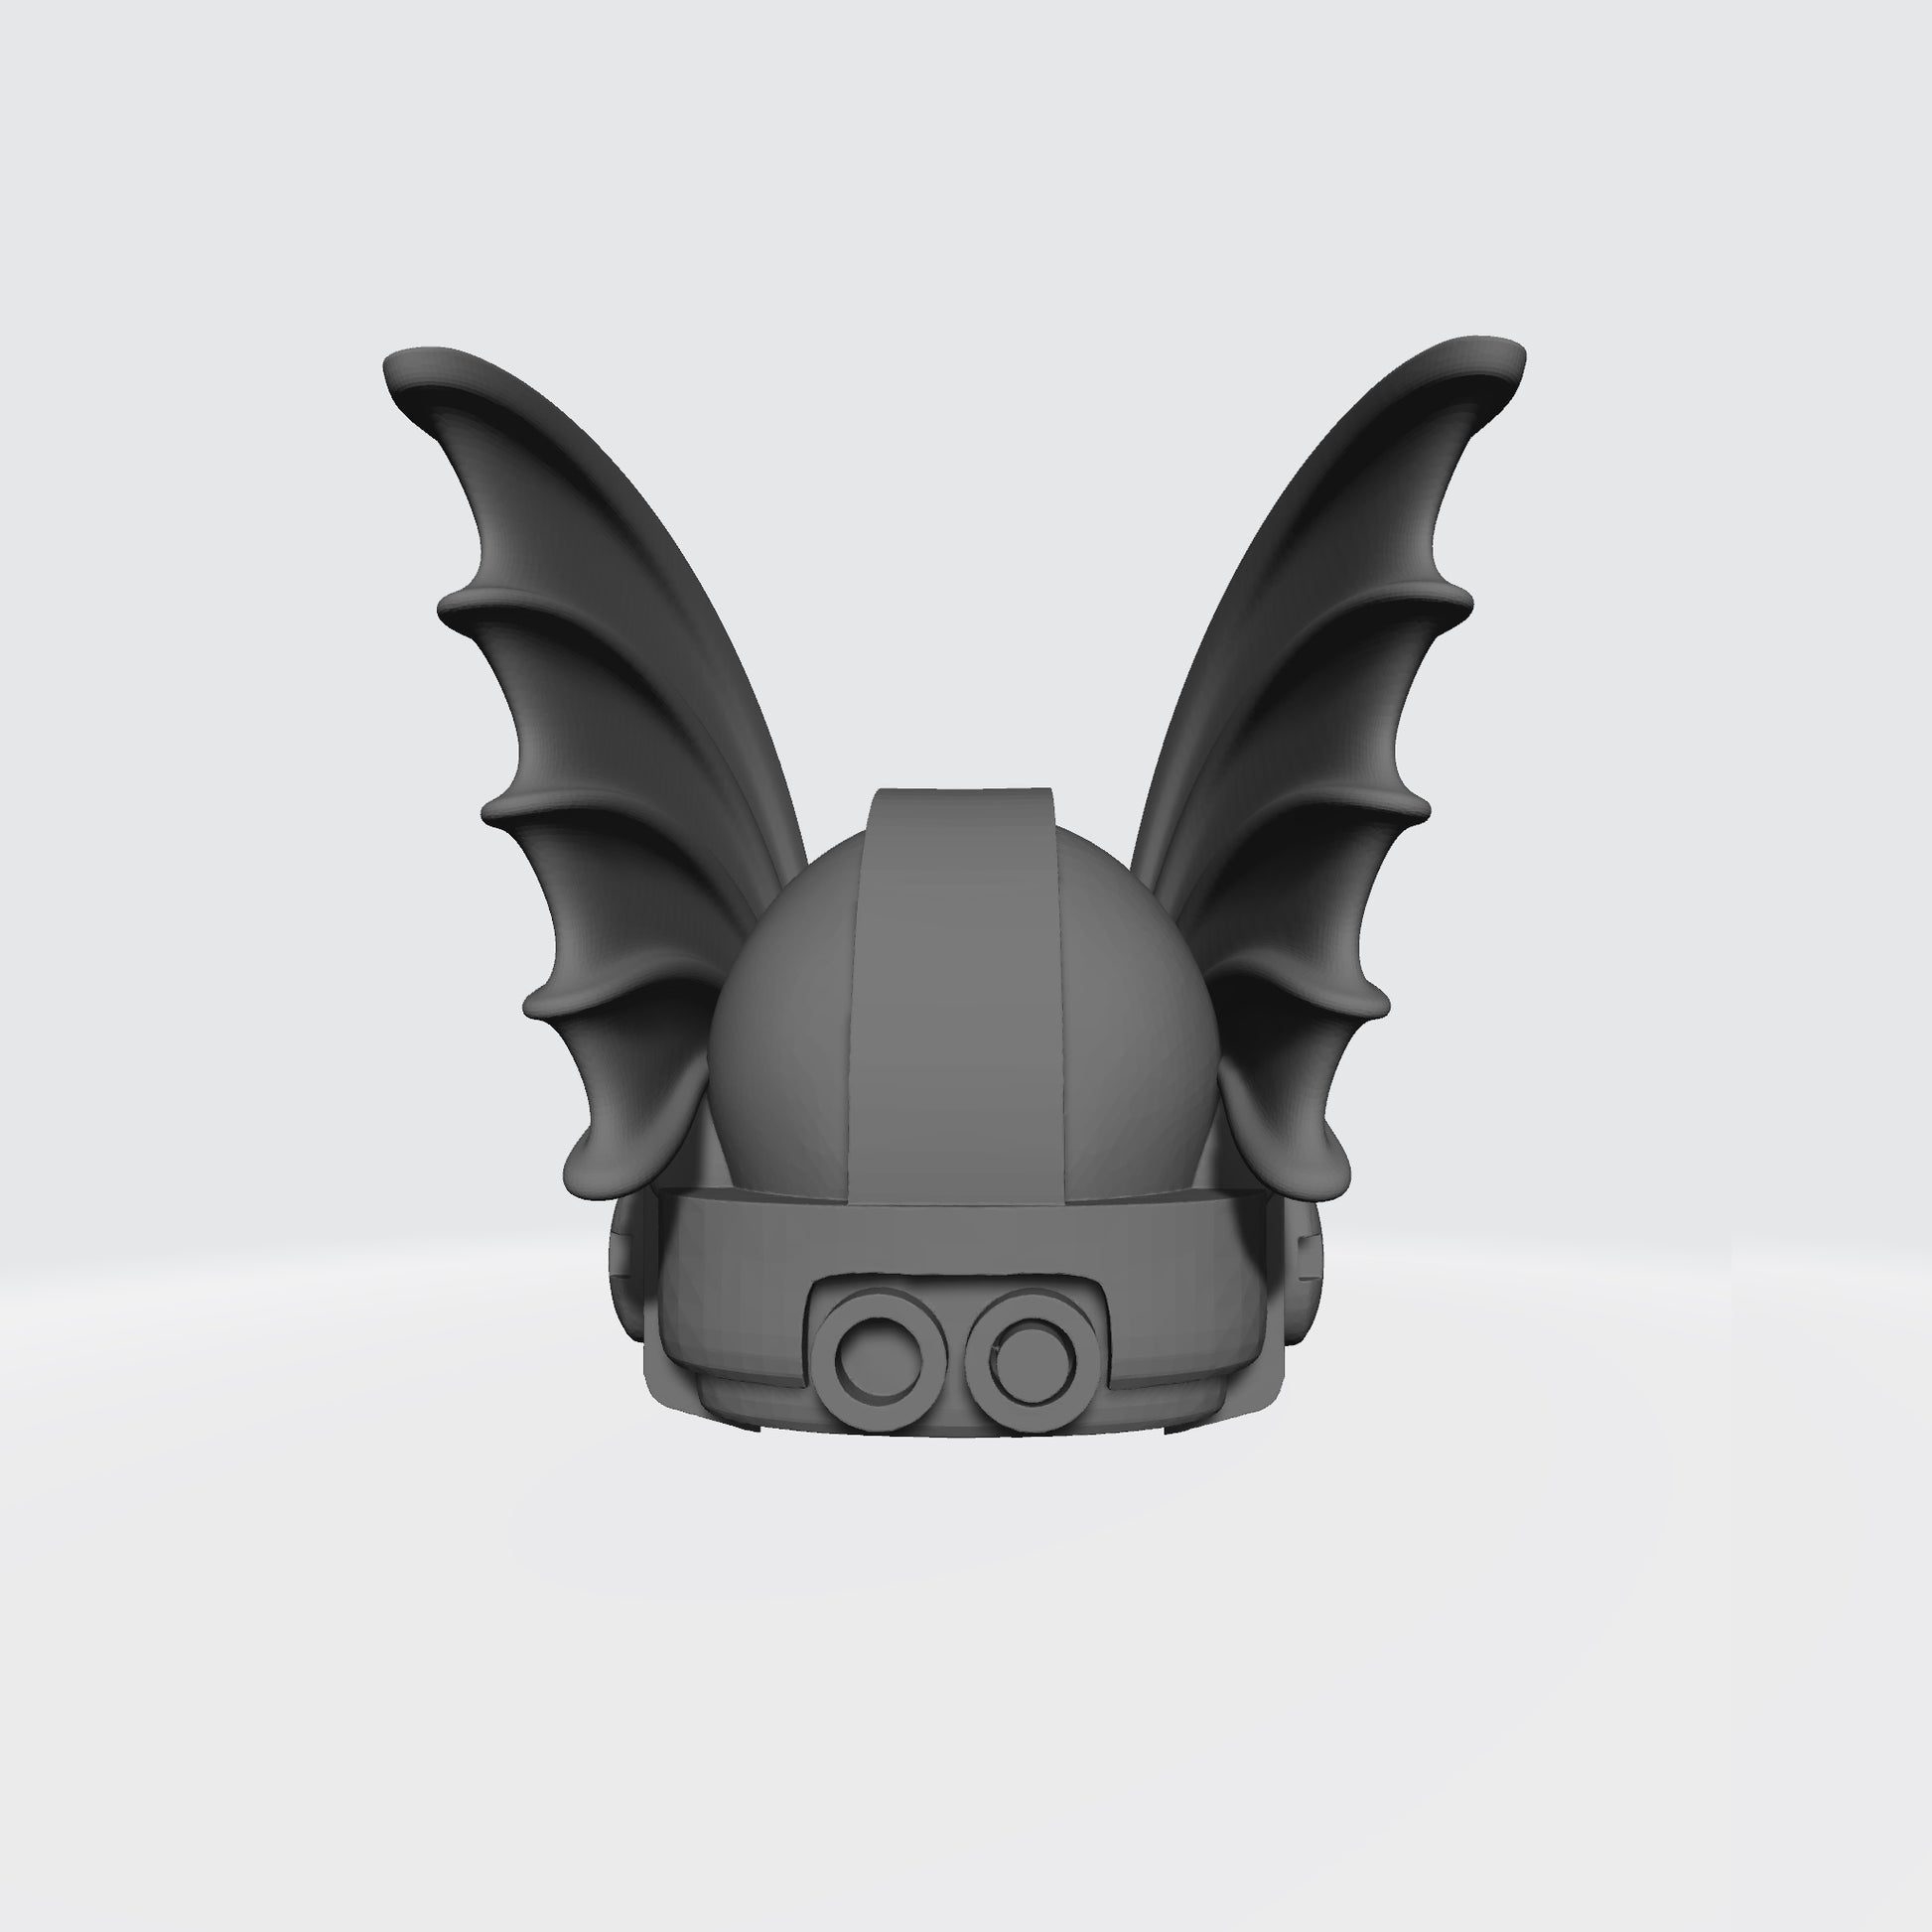 Back of the custom Night Lords Winged Skull Helmet Compatible with McFarlane Toys Space Marines Warhammer 40K VIIIth Legion